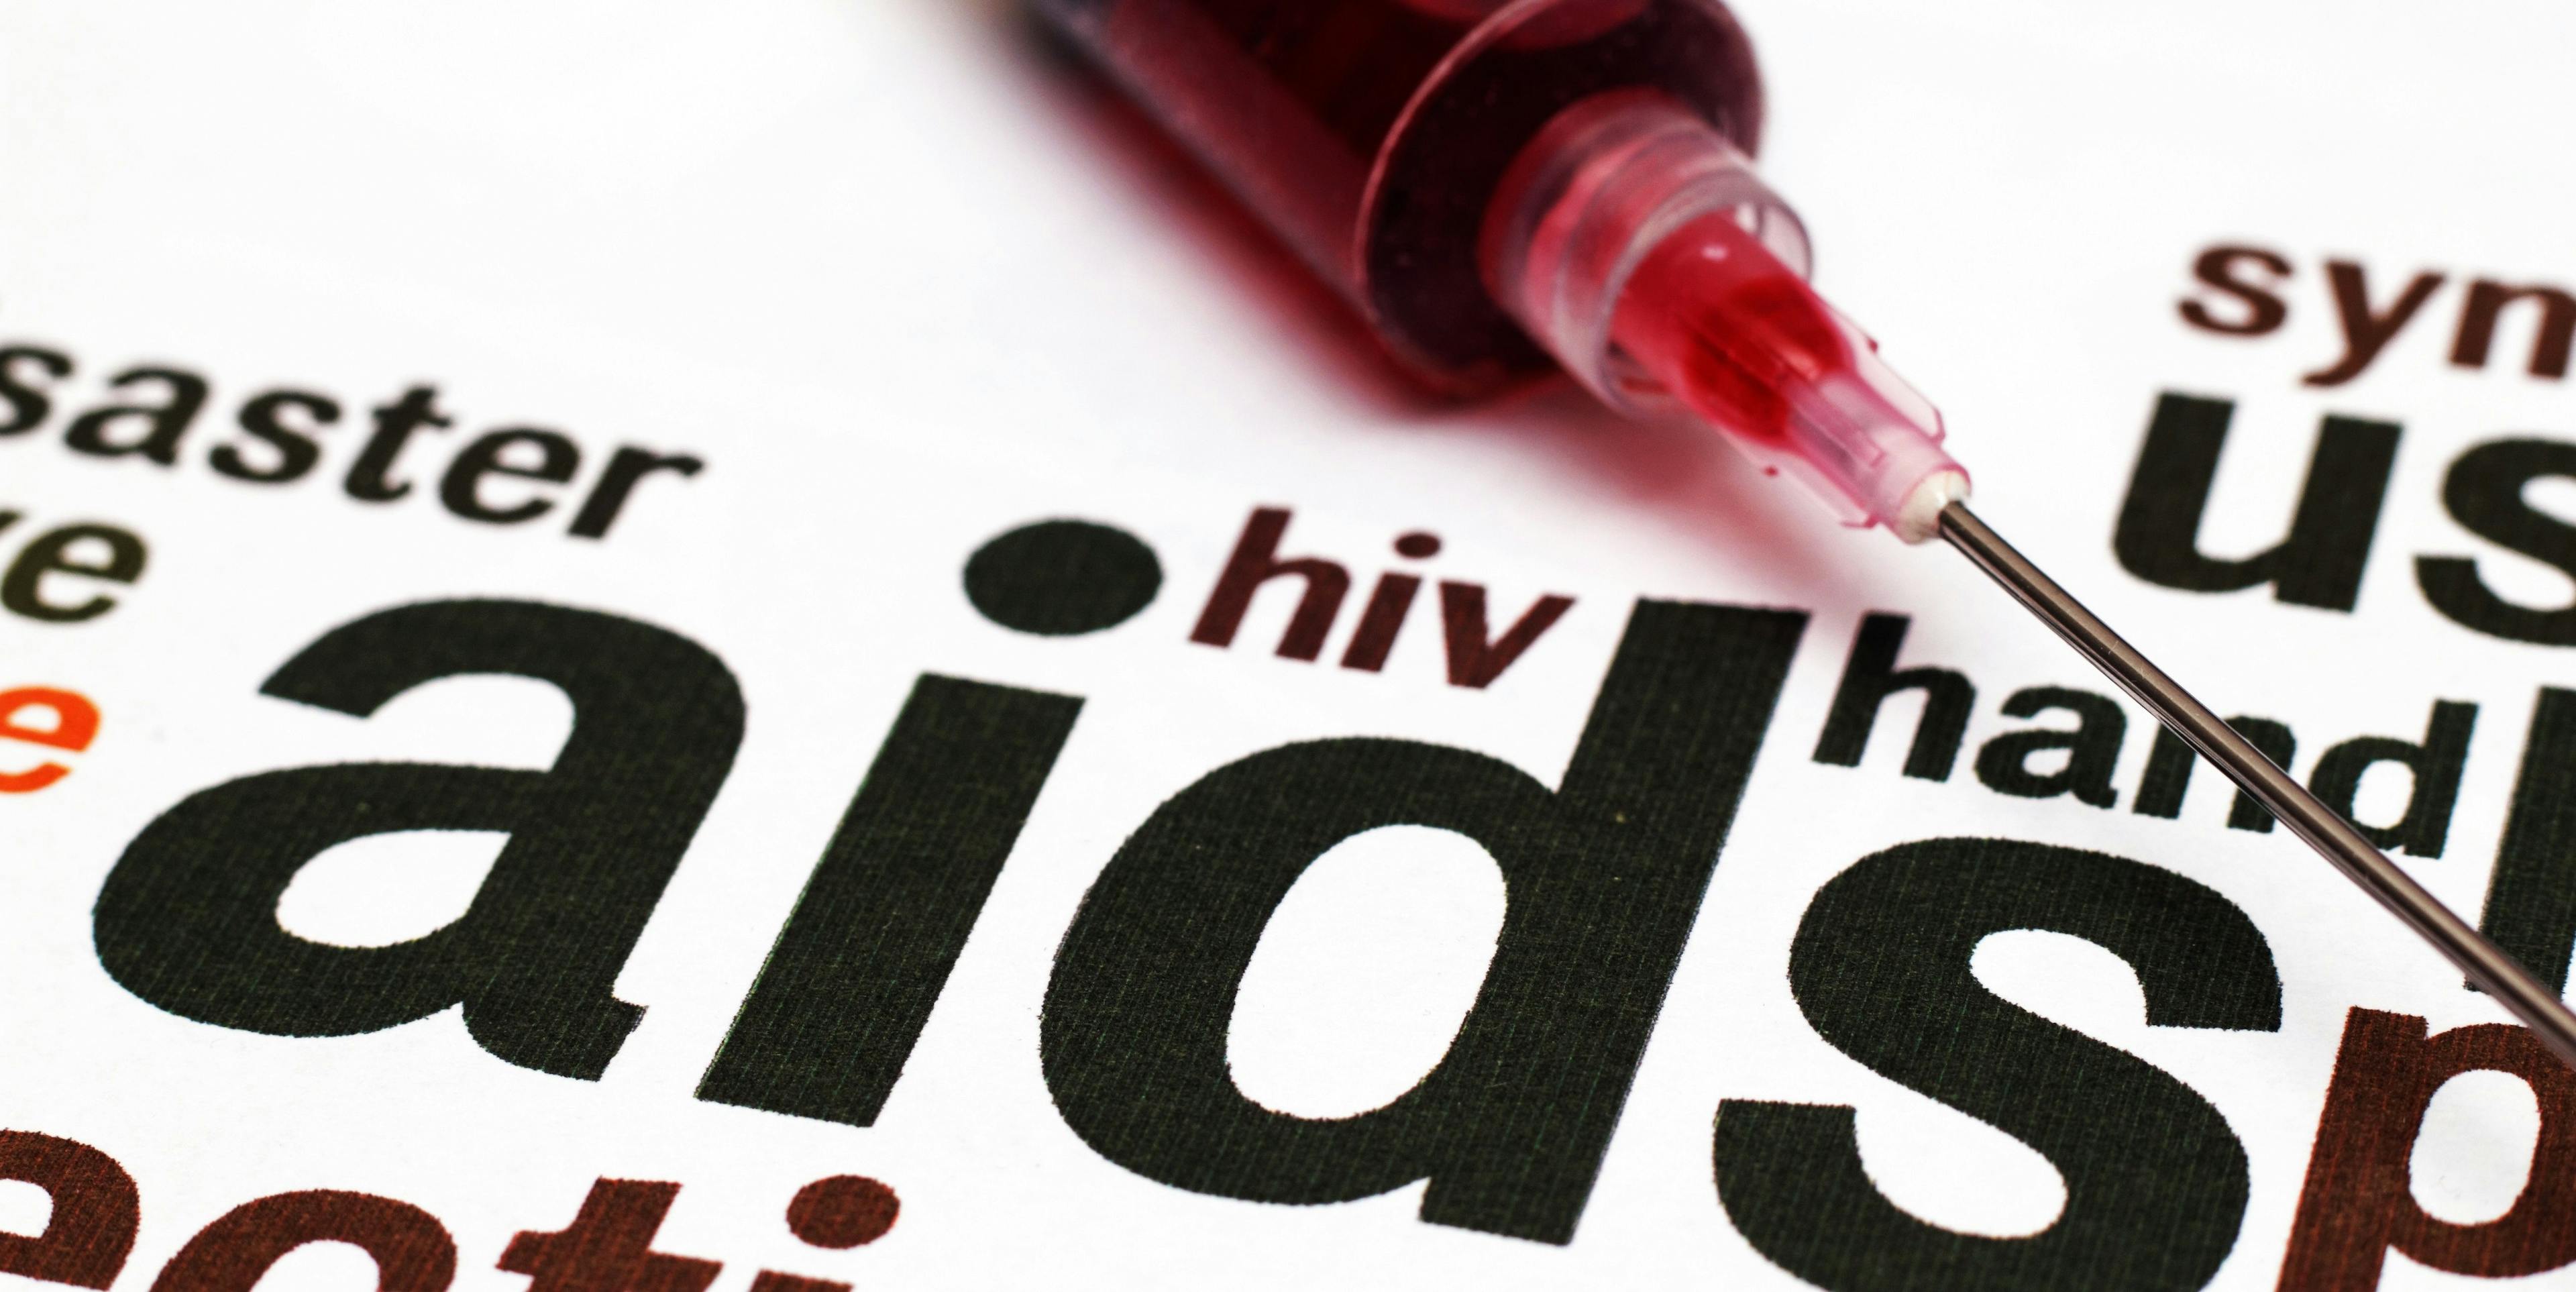 Innovative Prevention Program Aims to Combat Opioid-Induced HIV, HCV Epidemics